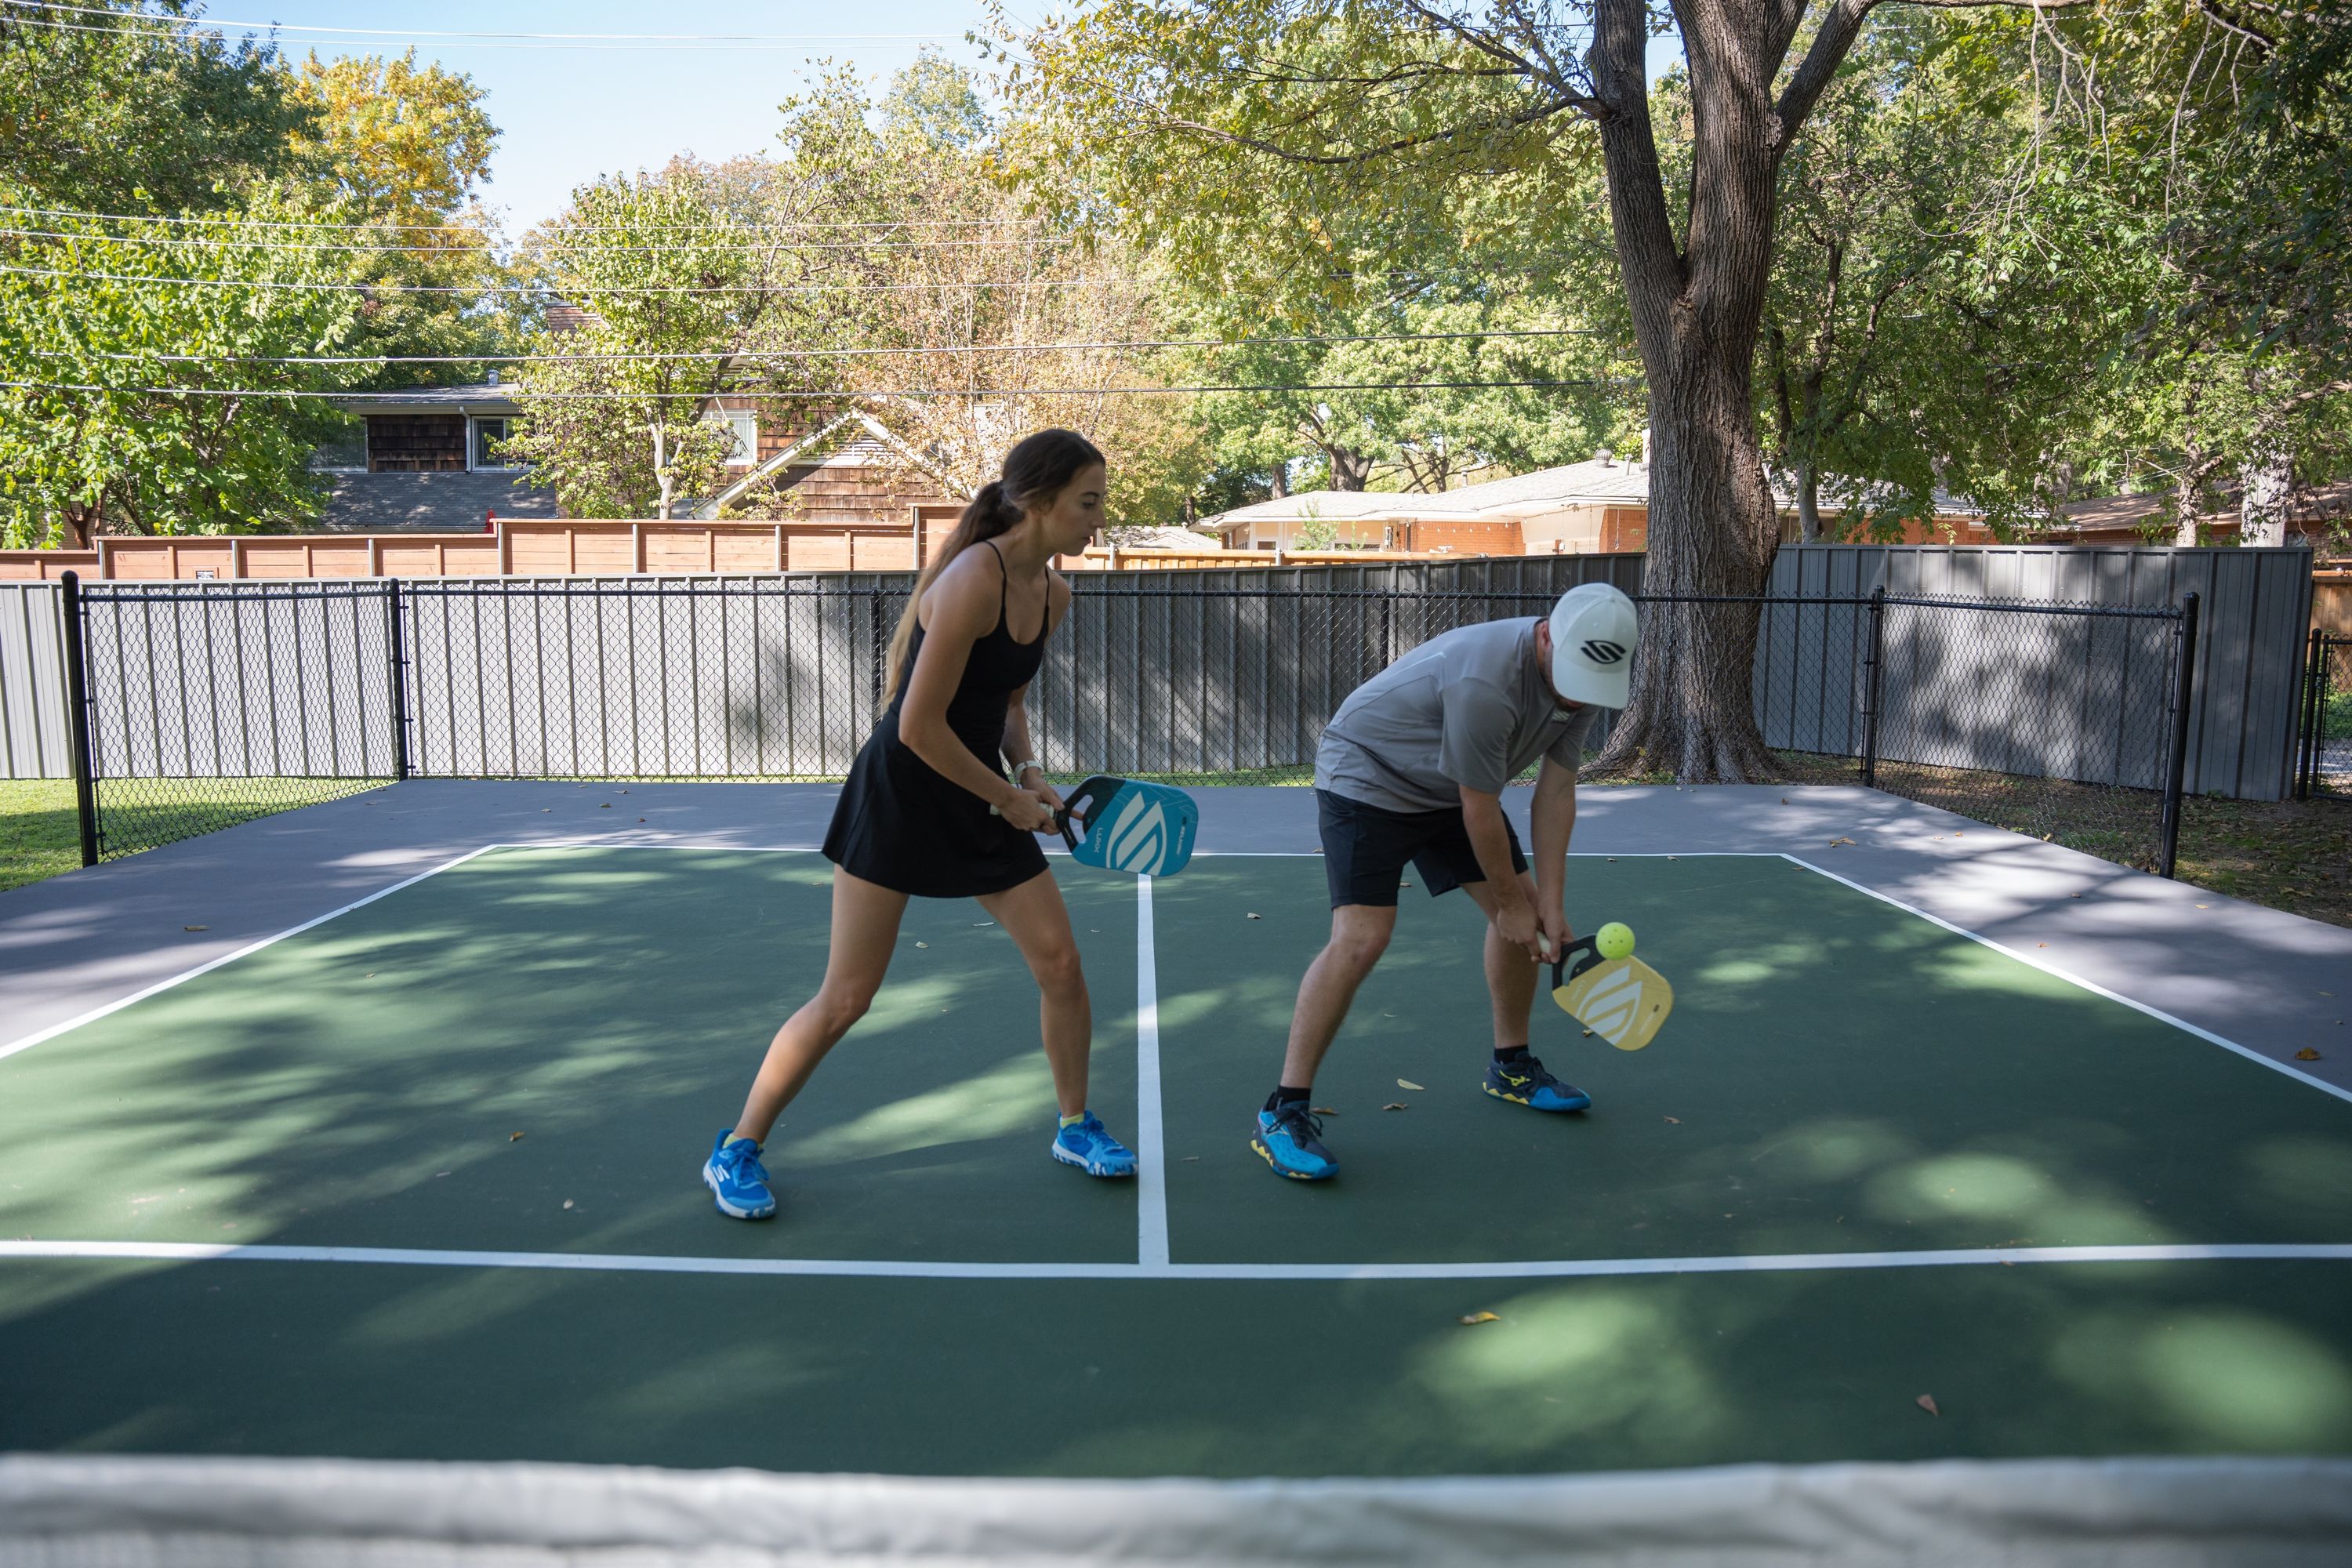 Learning your pickleball line rules is an important part of learning how to play pickleball.